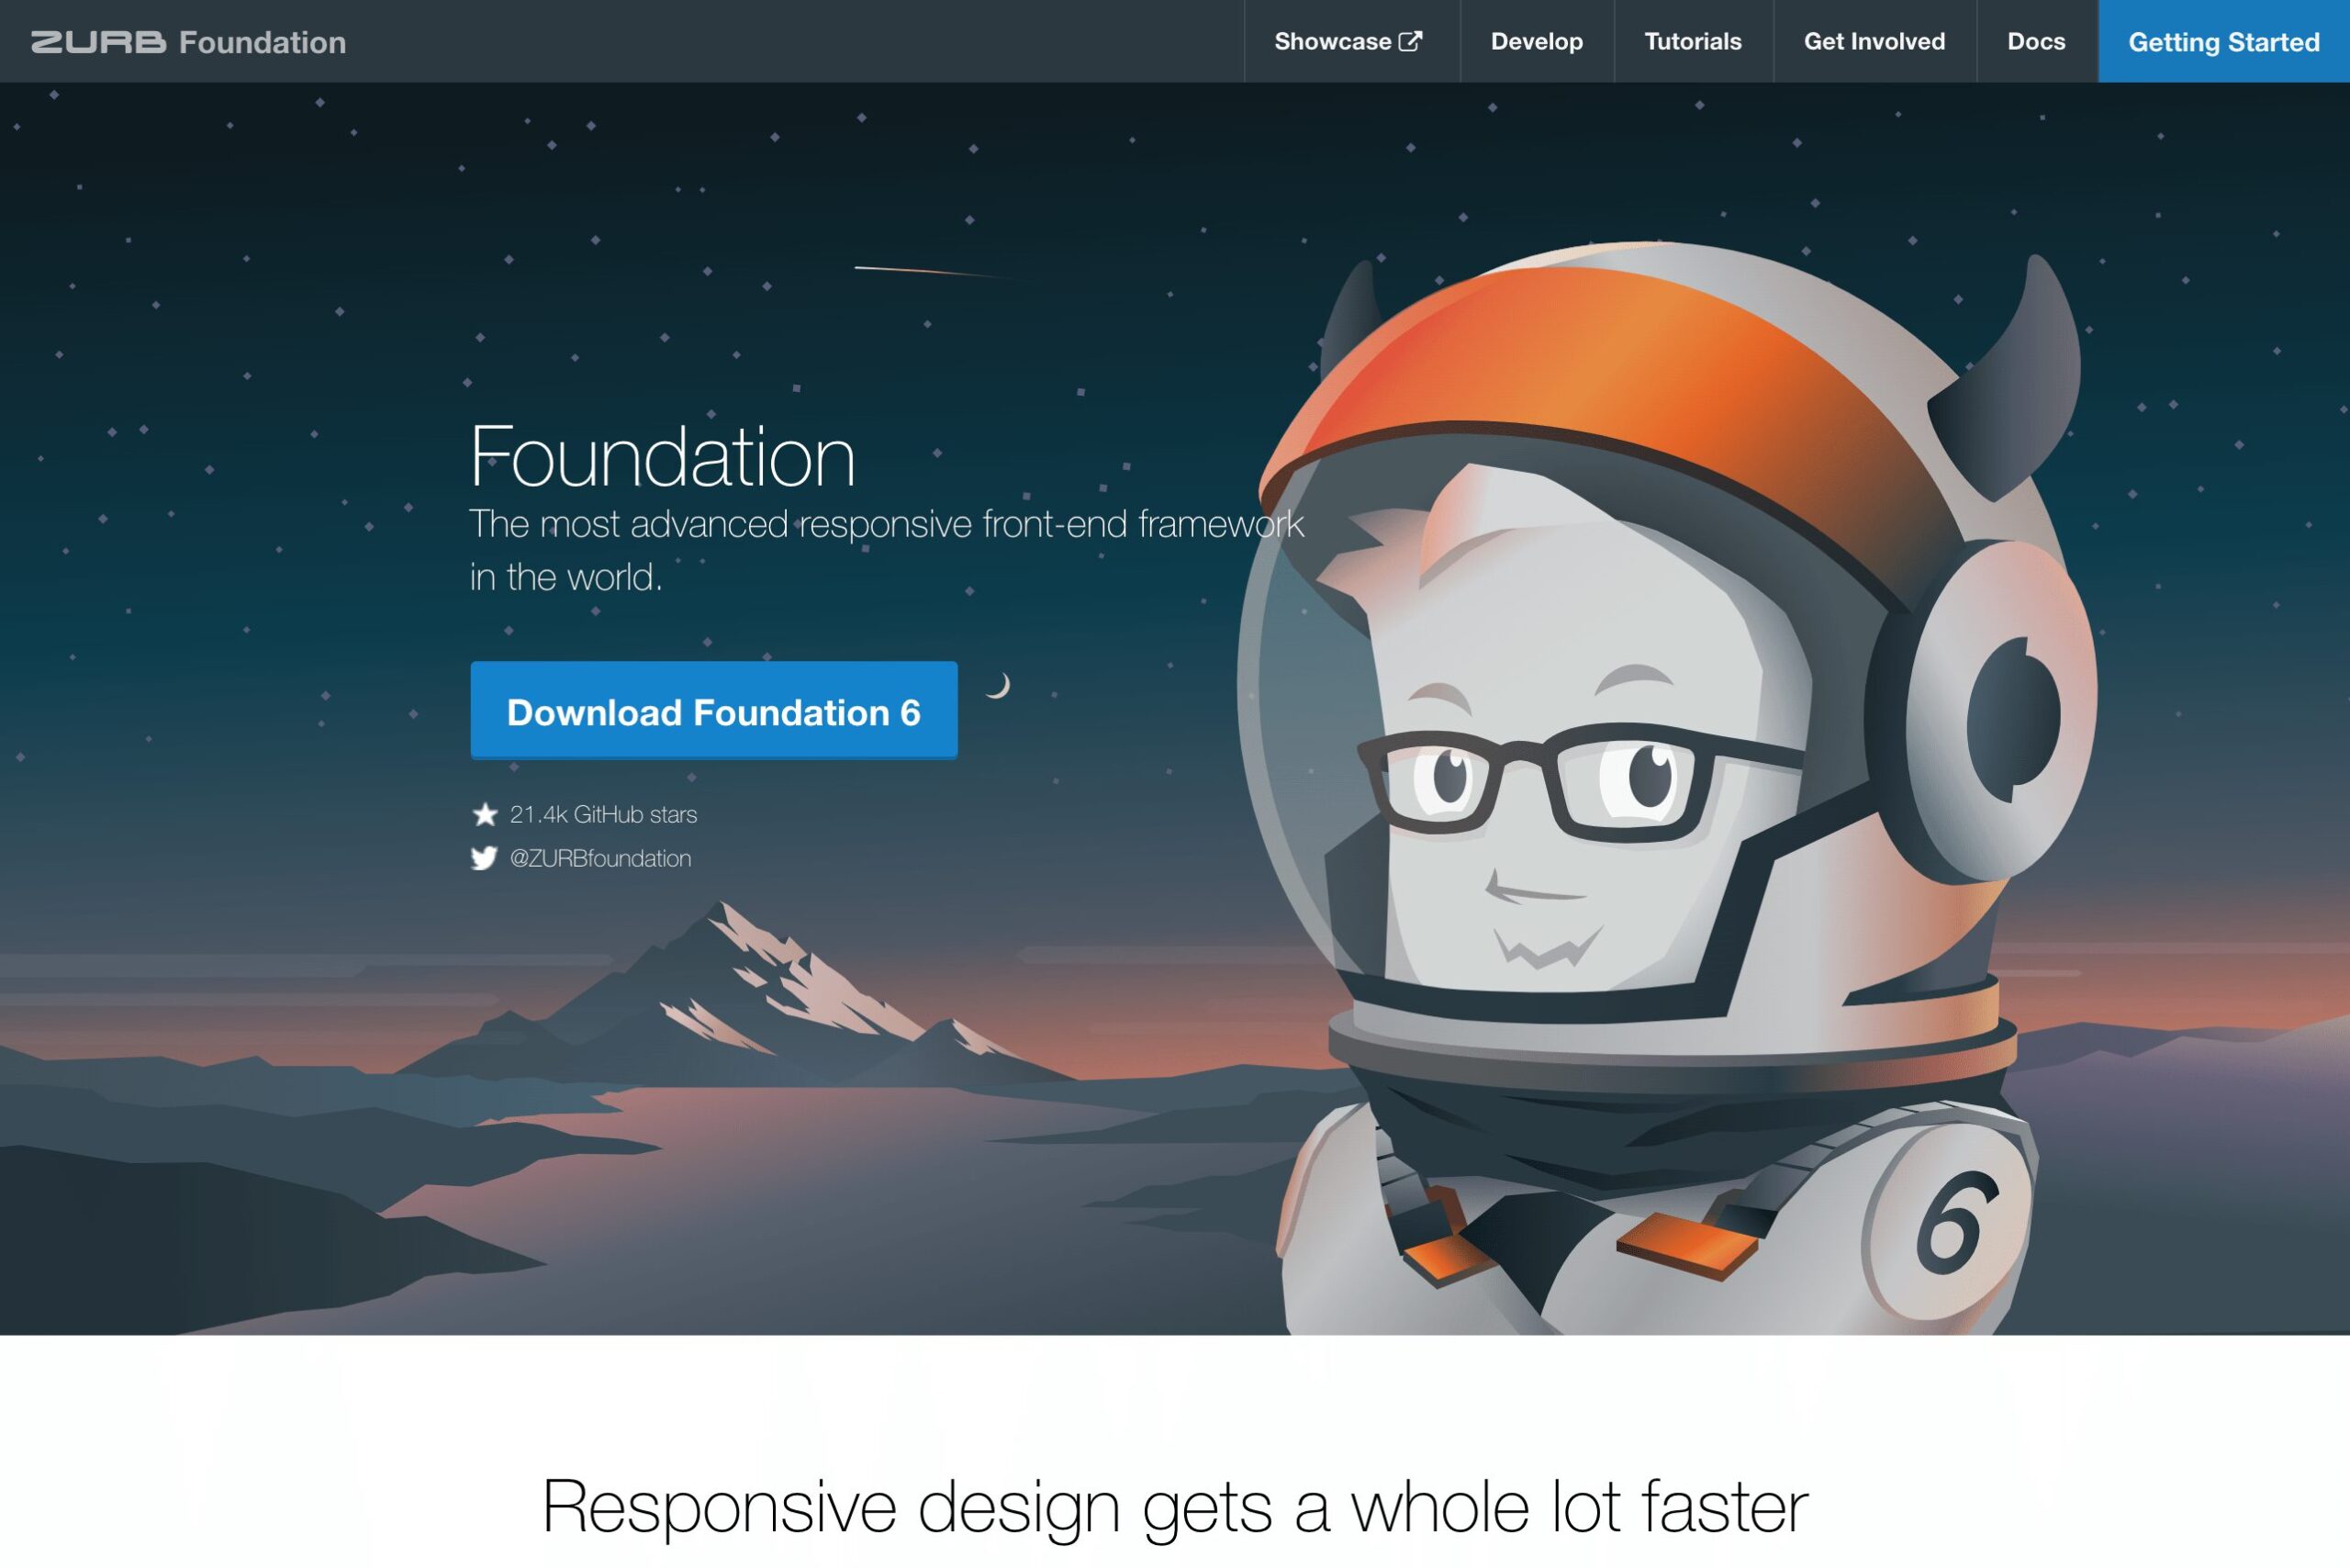 The_most_advanced_responsive_front_end_framework_in_the_world_Foundation